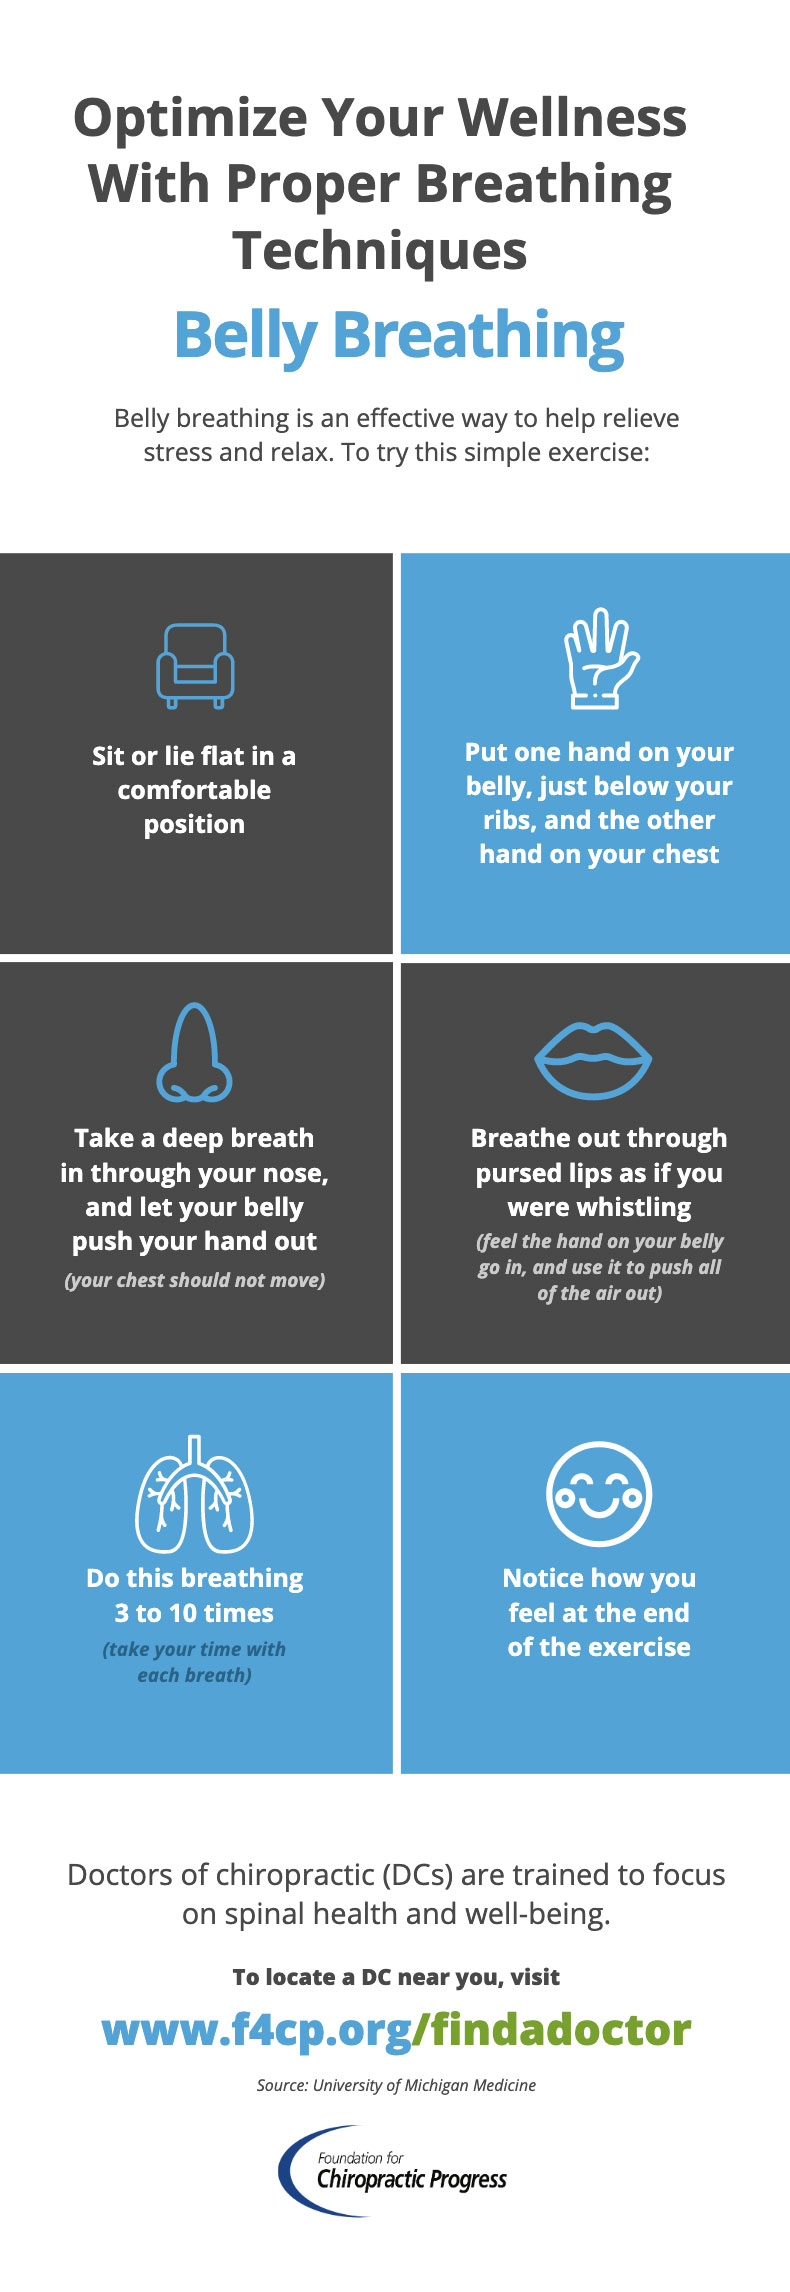 Belly breathing is an effective way ﻿to relieve stress and relax